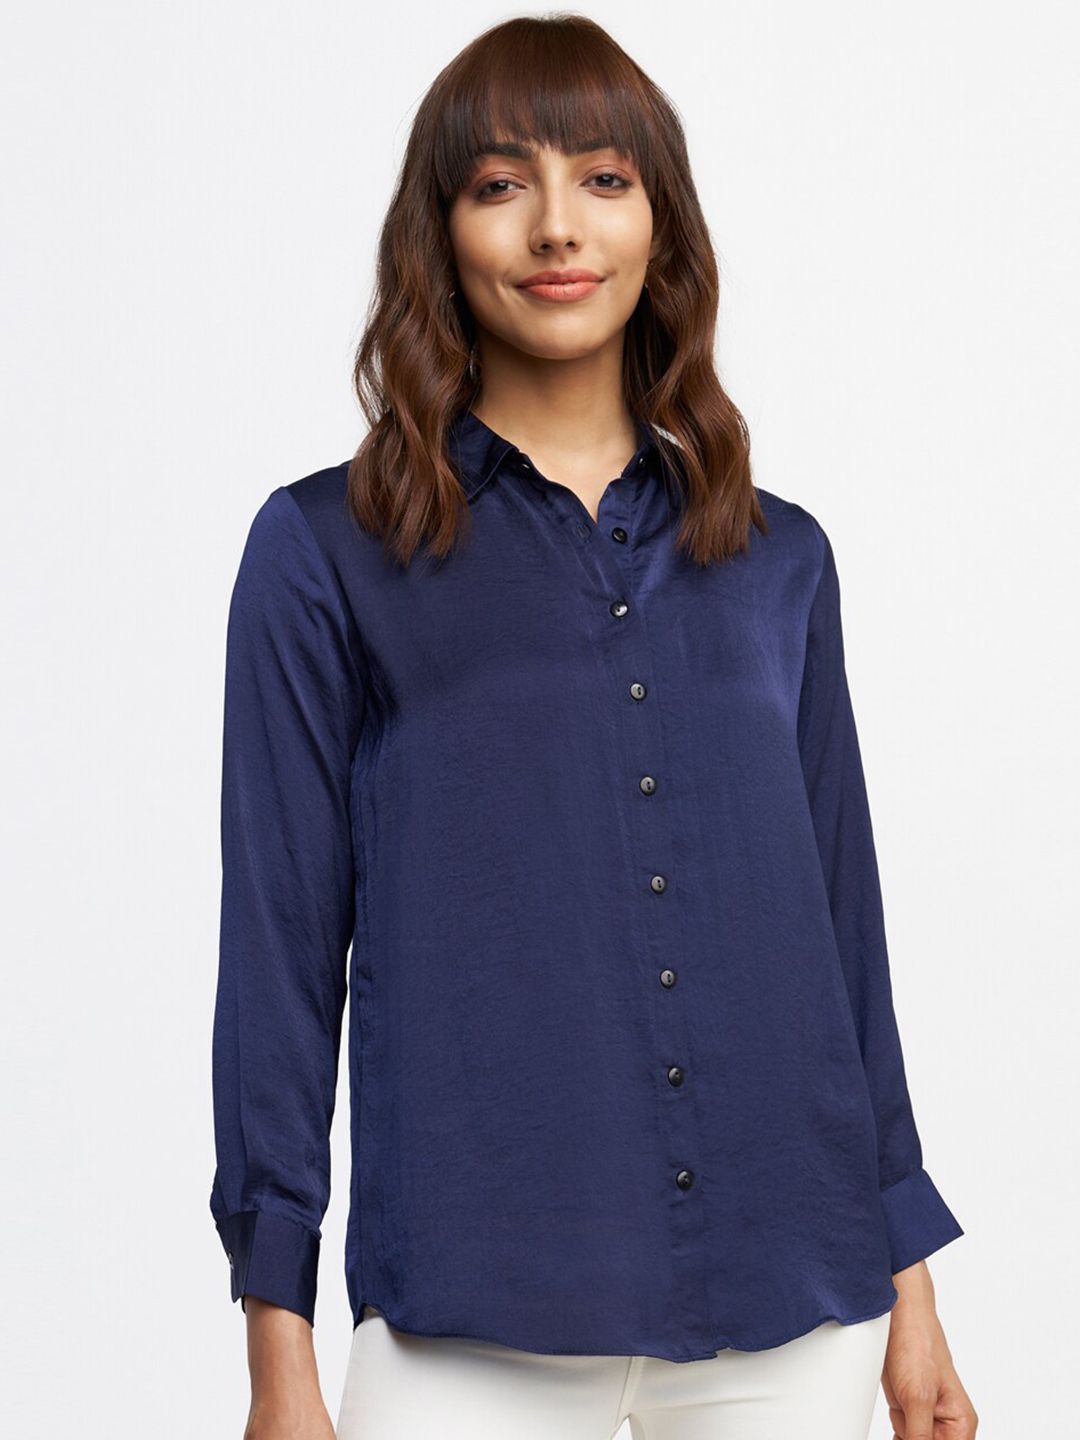 AND Navy Blue Solid Shirt Style Top Price in India